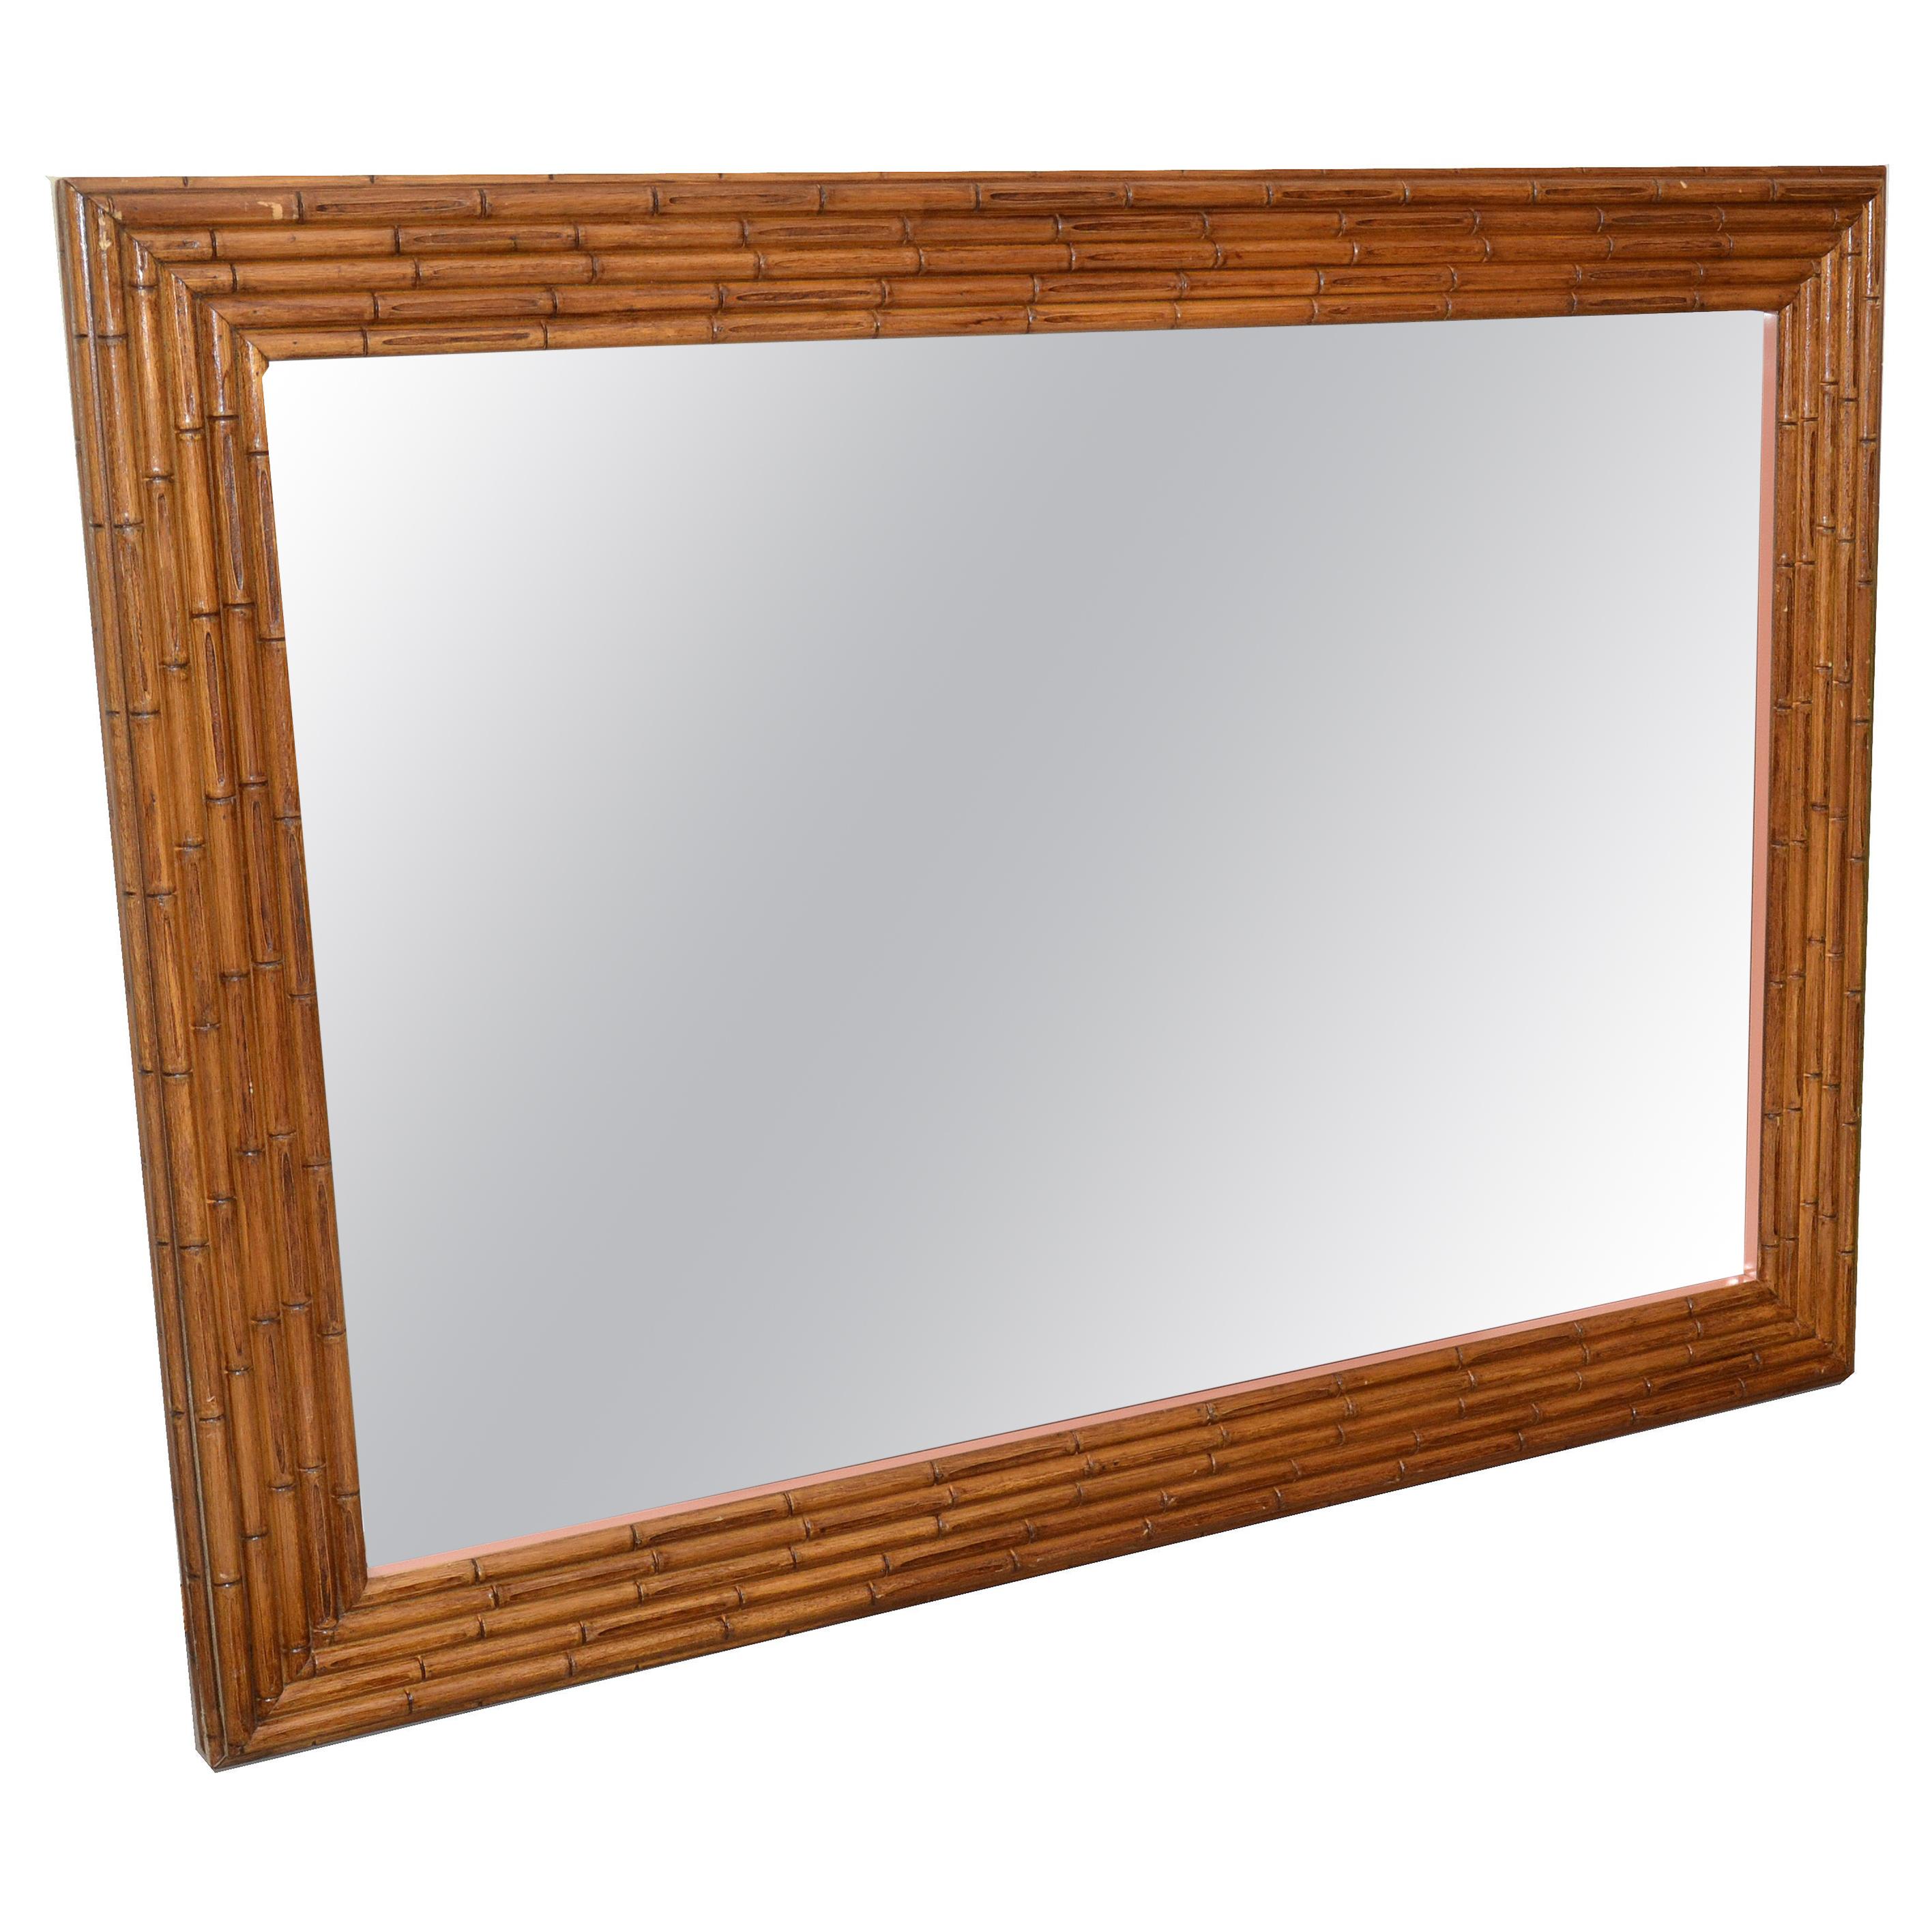 1950s Bohemian Chic large and heavy rectangular wall or dresser mirror made out of Bamboo. 
The mirror is very heavy and is supported by a wooden backing for secure hanging.
American craftsmanship in its best.
Can be used as single wall mirror or